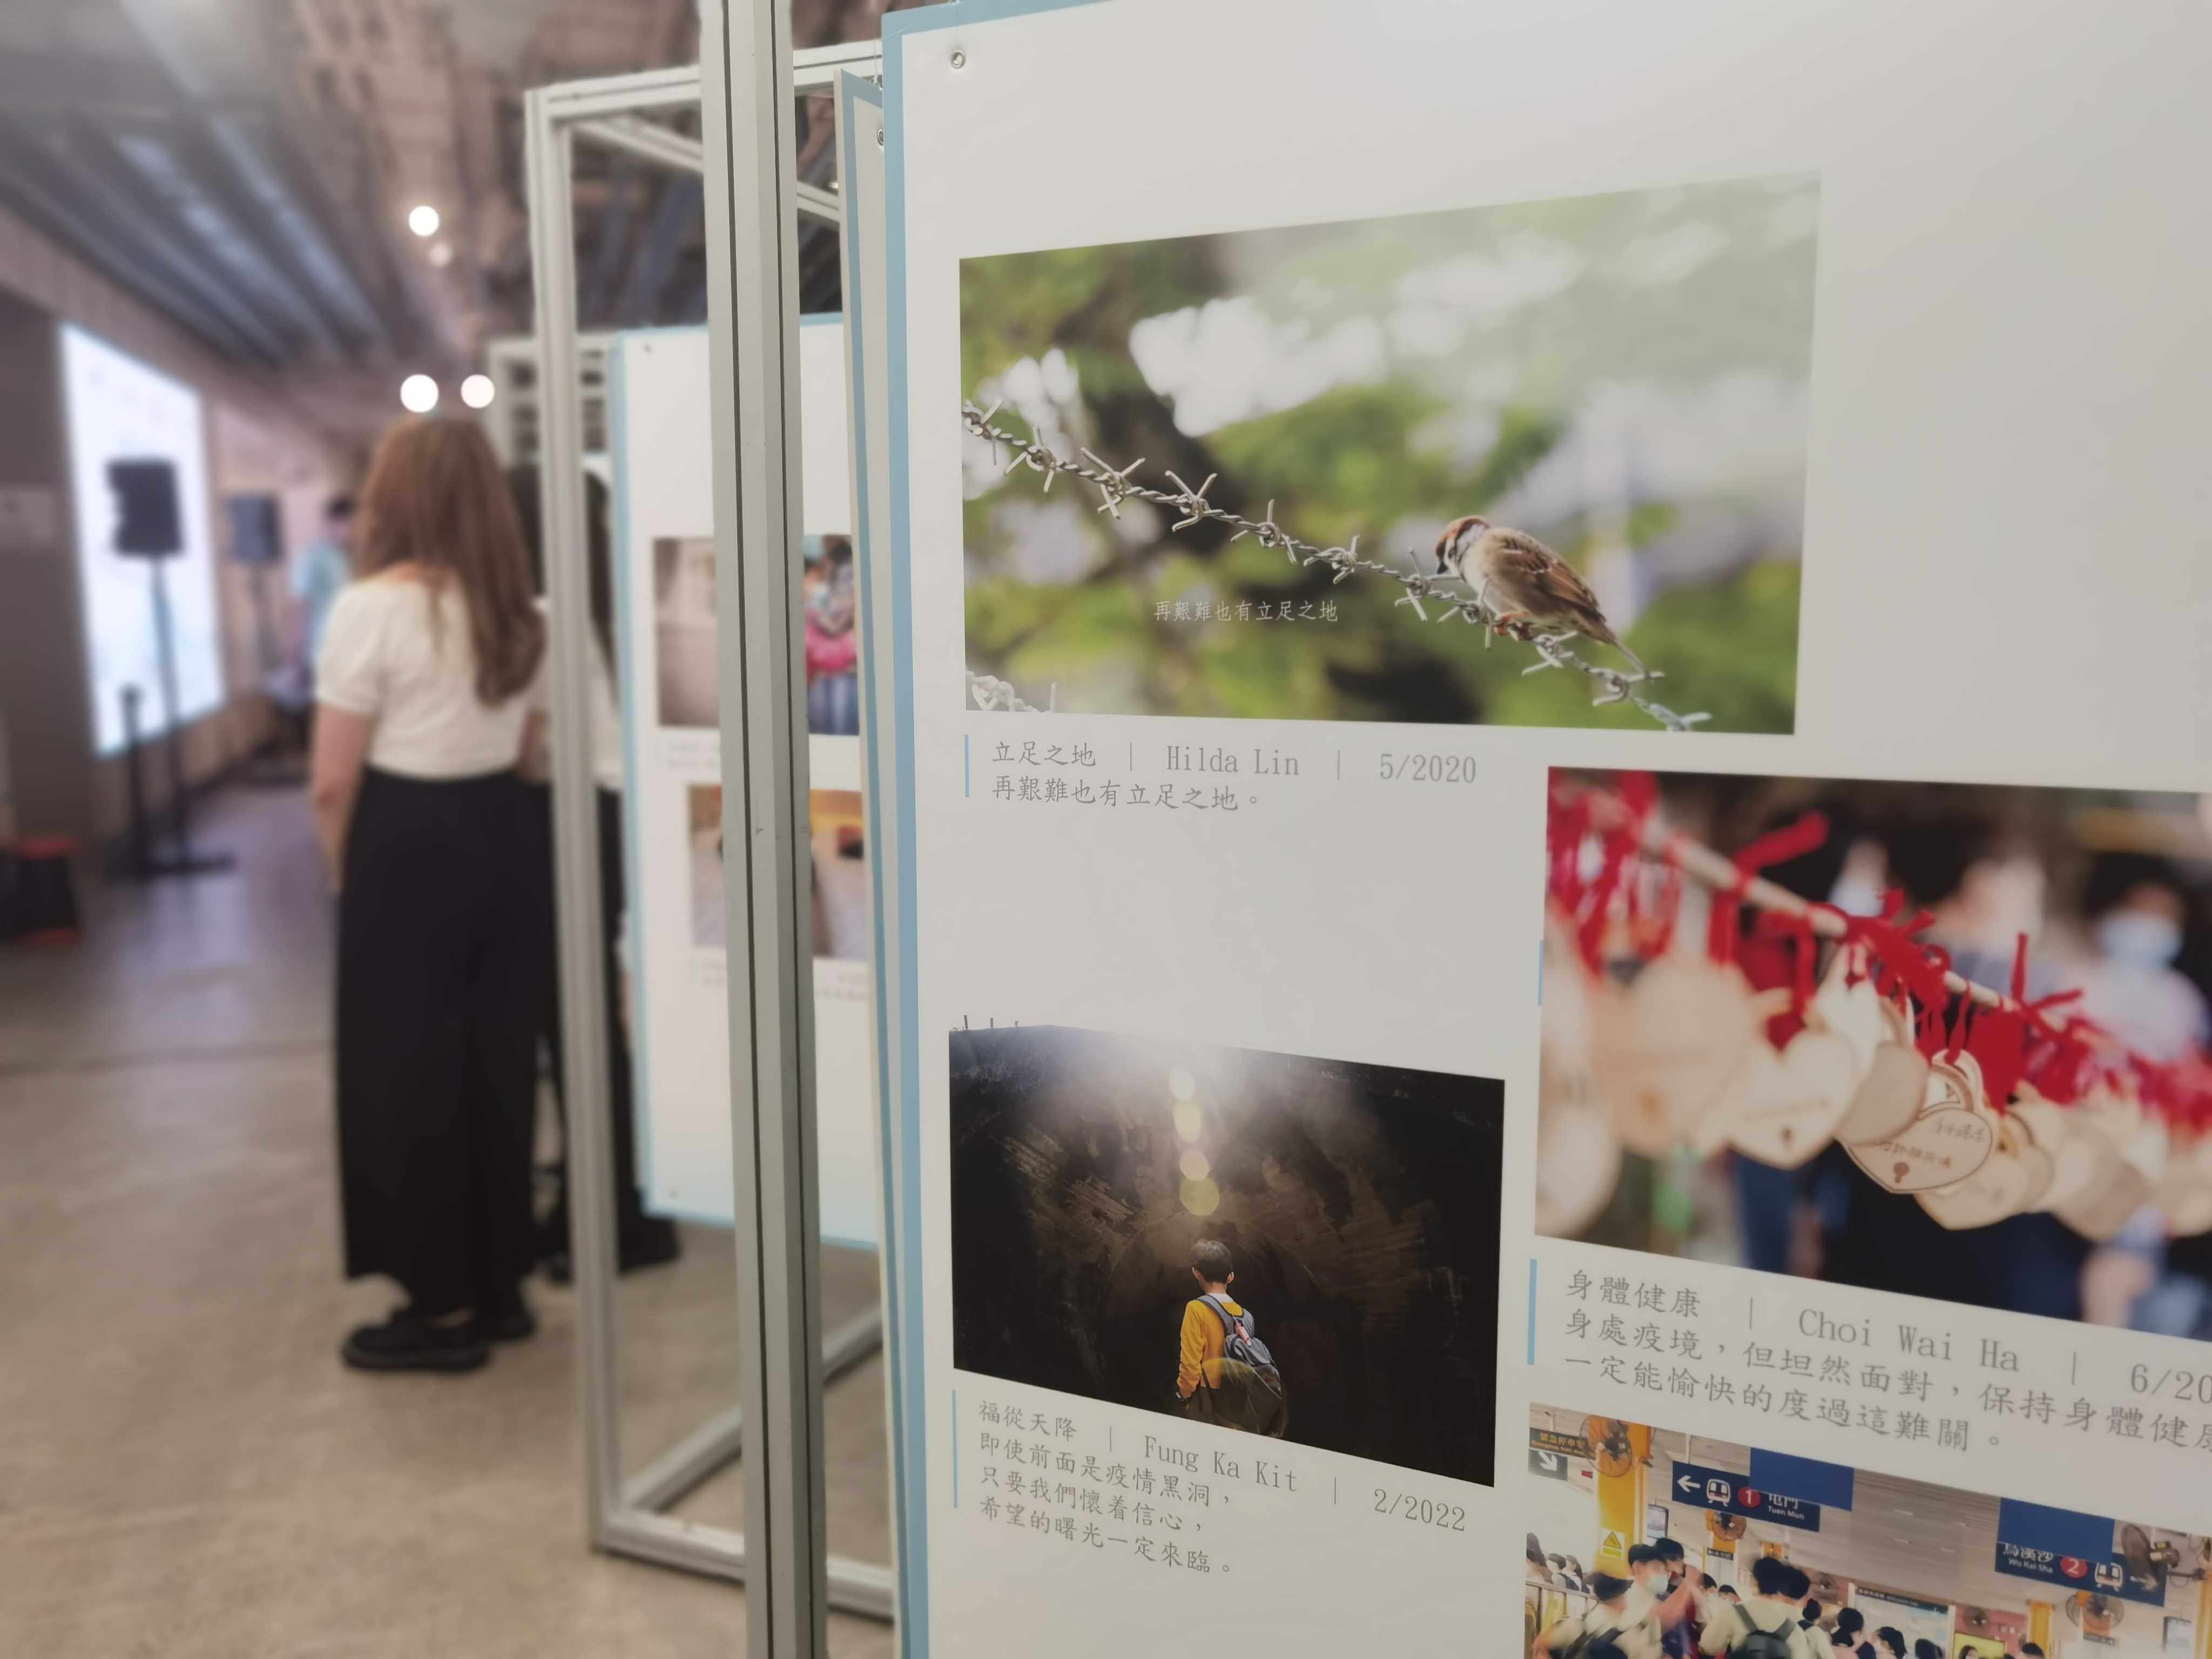 A photo exhibition held by the Mental Health Photographic Society ahead of the launch of the book “Sunshine Amid the Pandemic”, which reflects on Hongkongers’ mental health during Covid-19. Photo: Hazel Luo